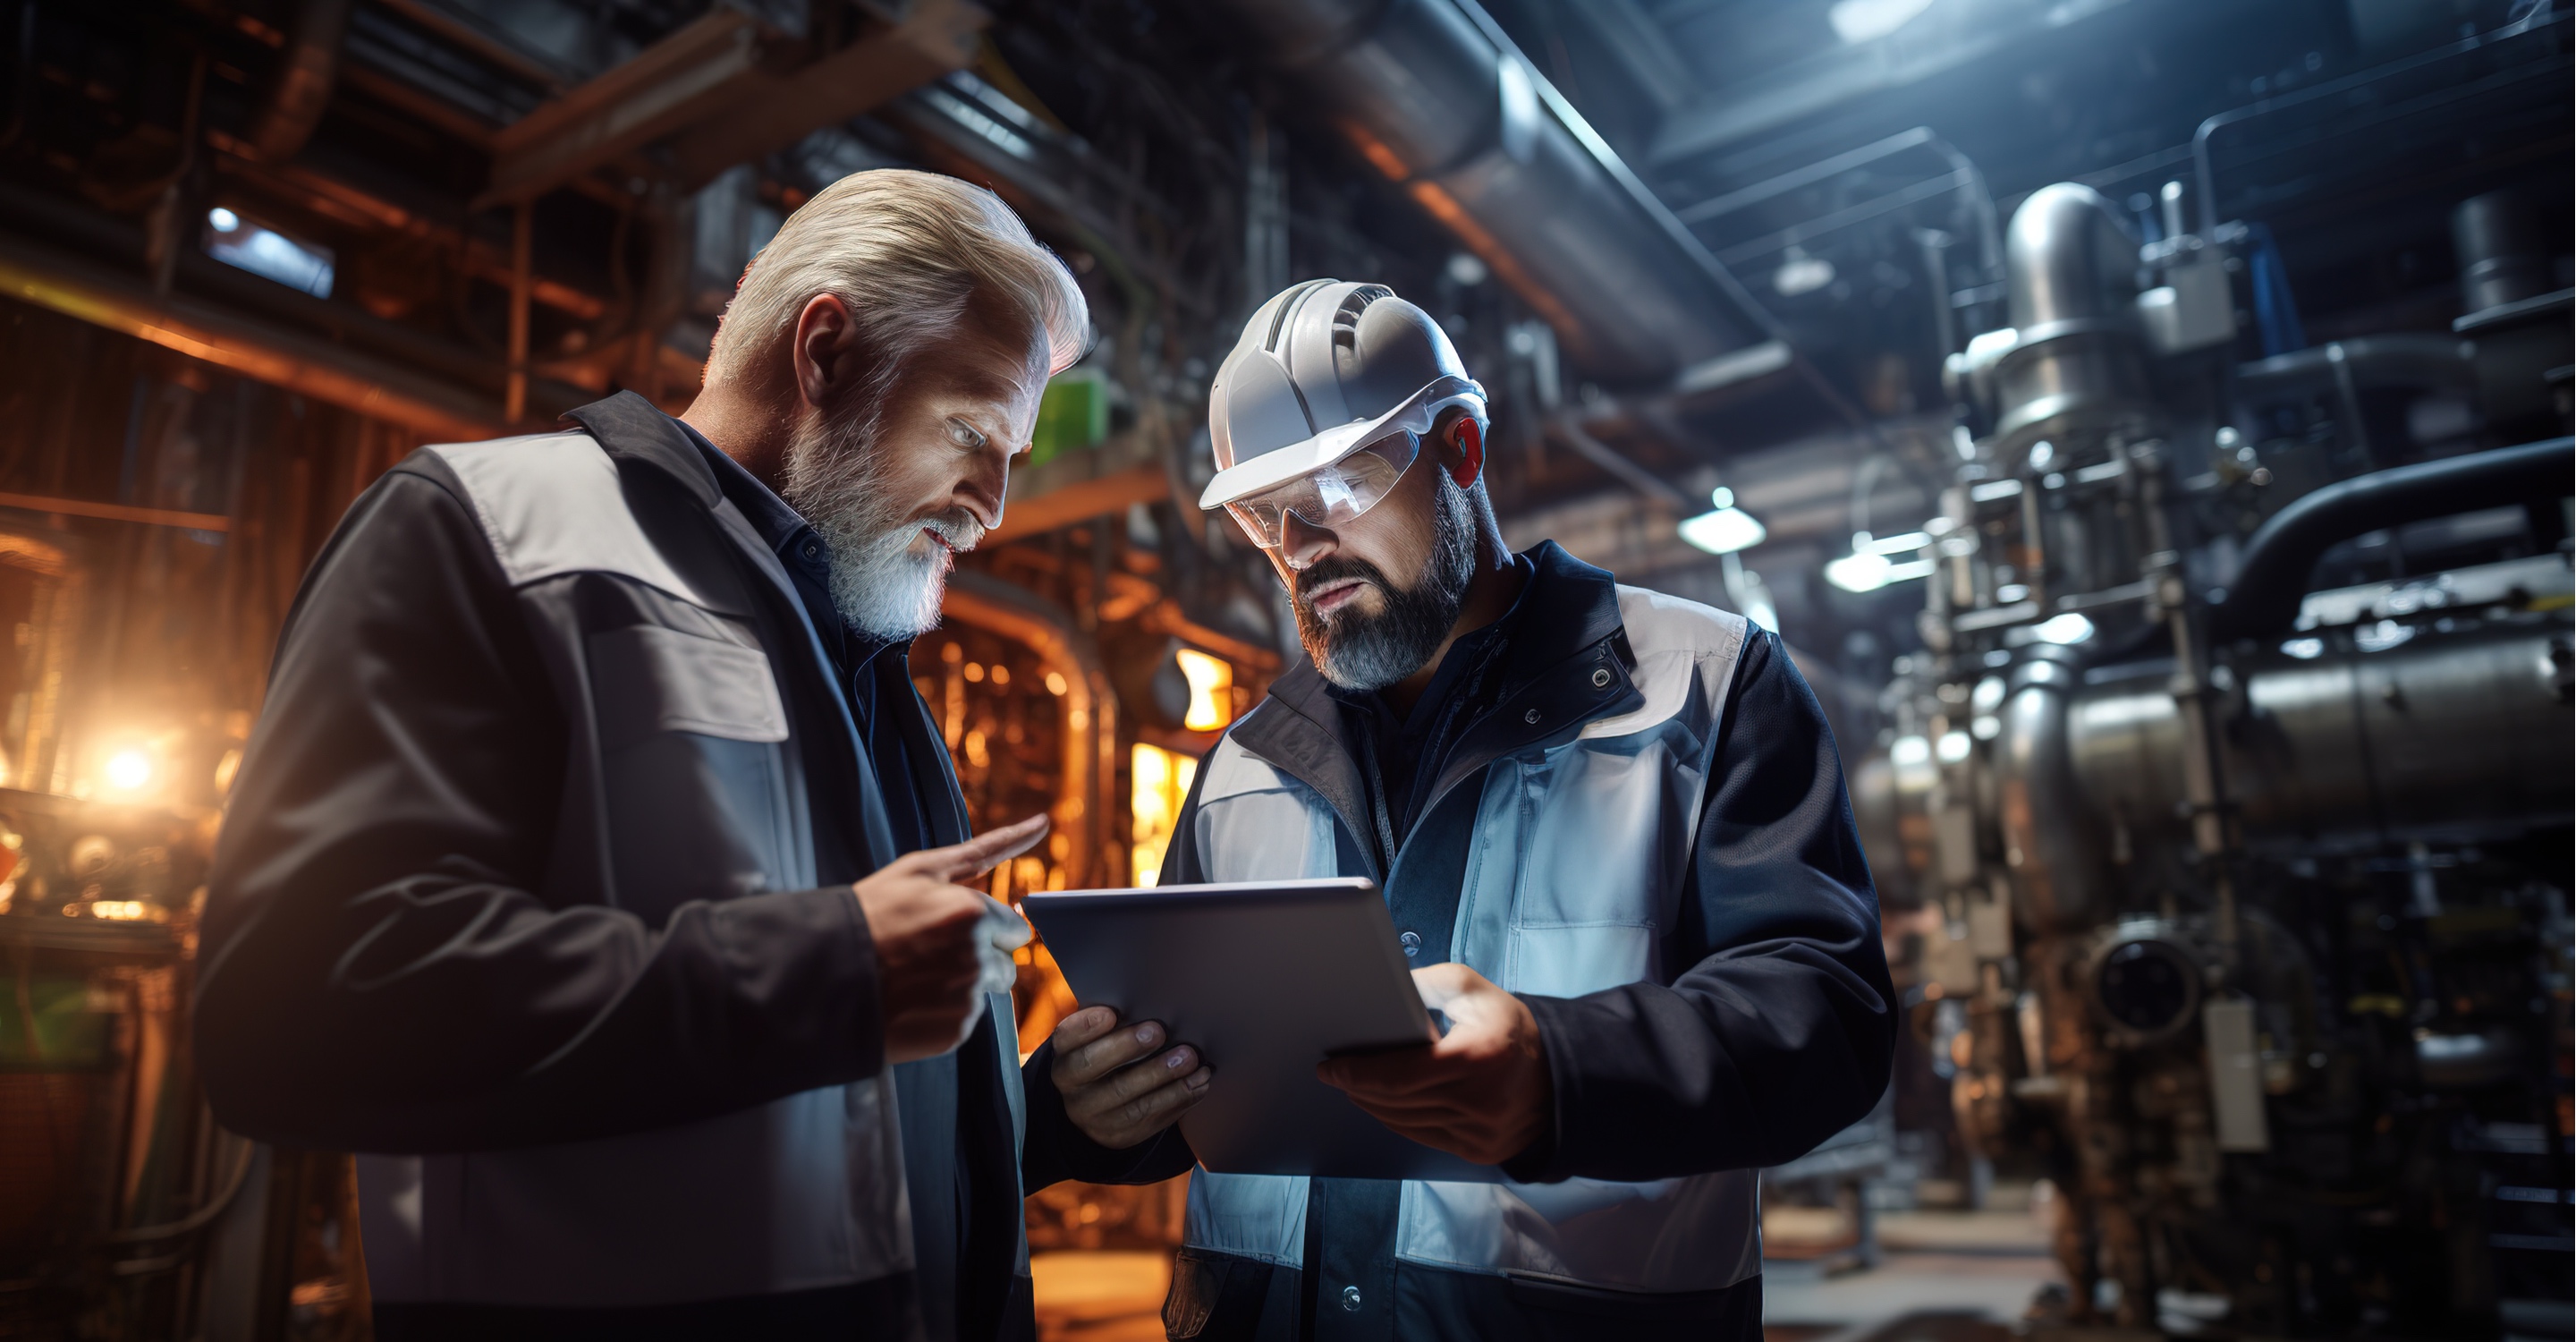 Two men wearing industrial work attire look at a tablet while standing in a factory